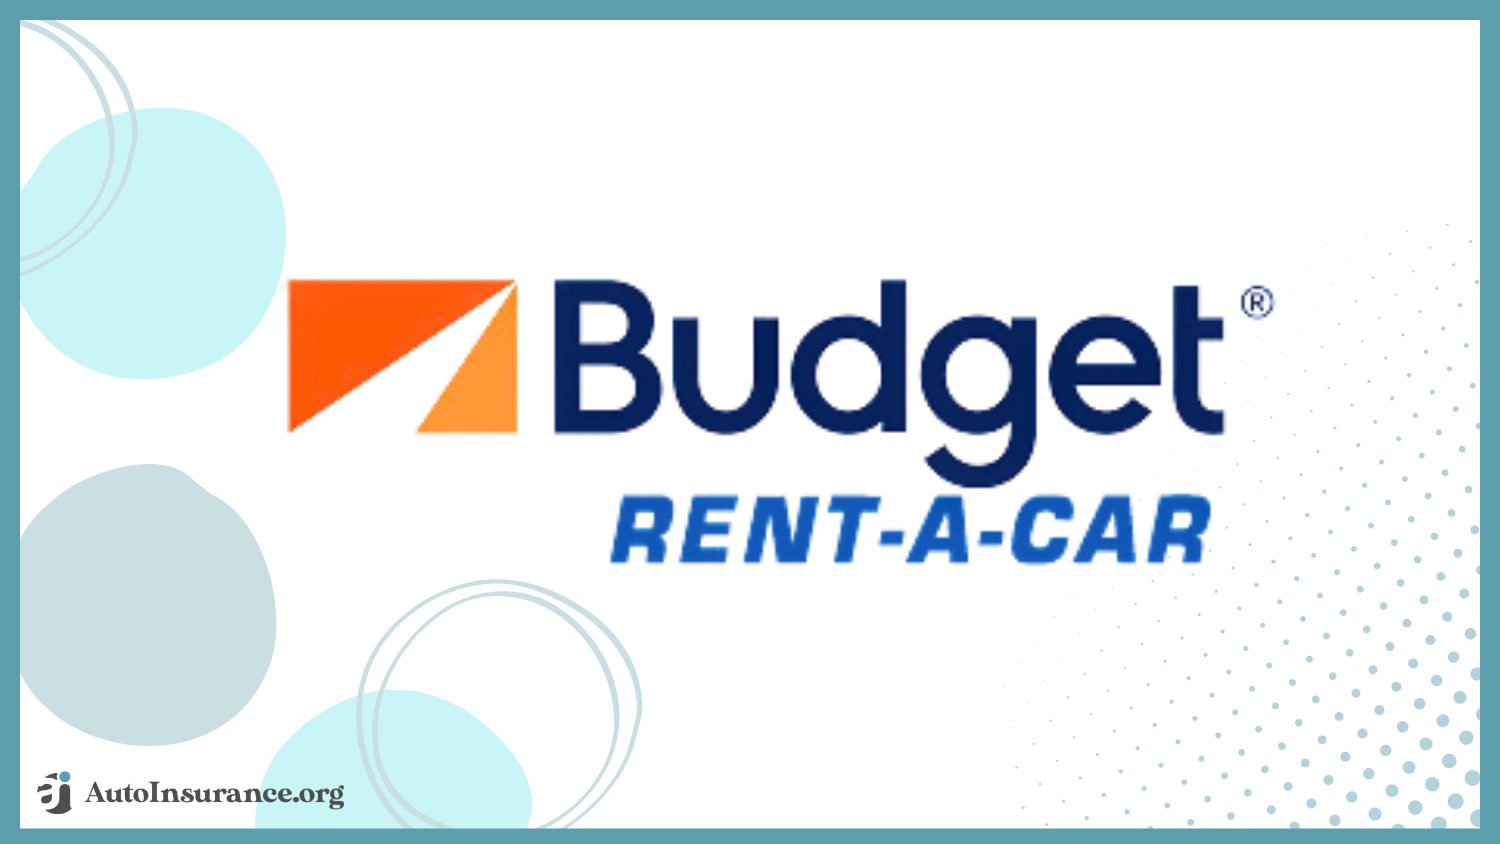 budget: Best Rental Auto Insurance That Covers Additional Drivers